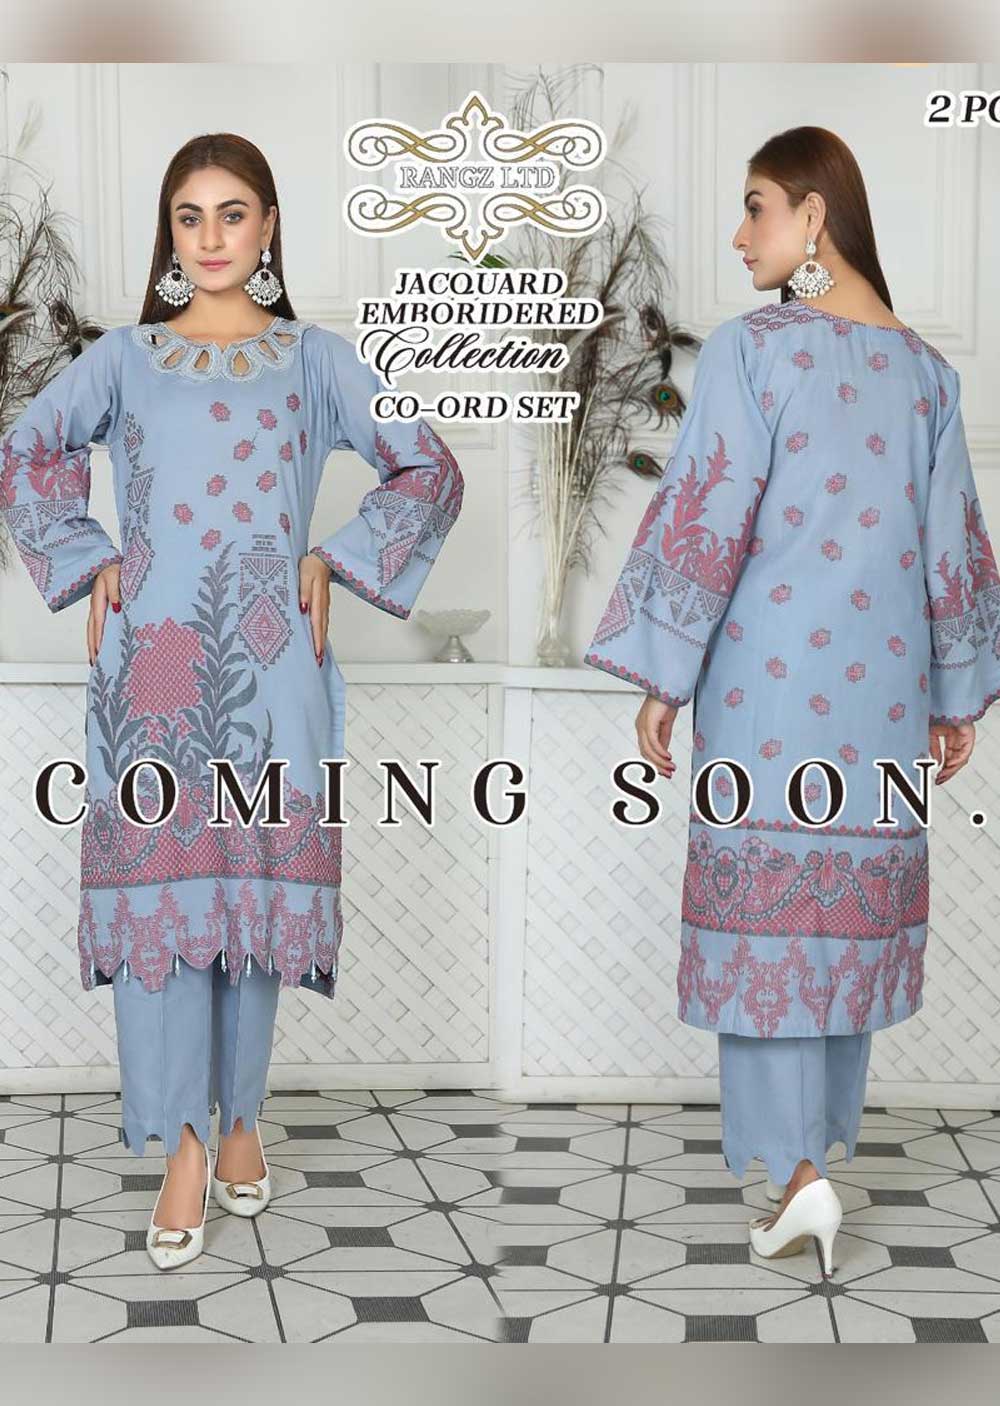 RGZS-05 - Readymade - 2 Piece Jacquard Embroidered Suit by Rangz - Memsaab Online